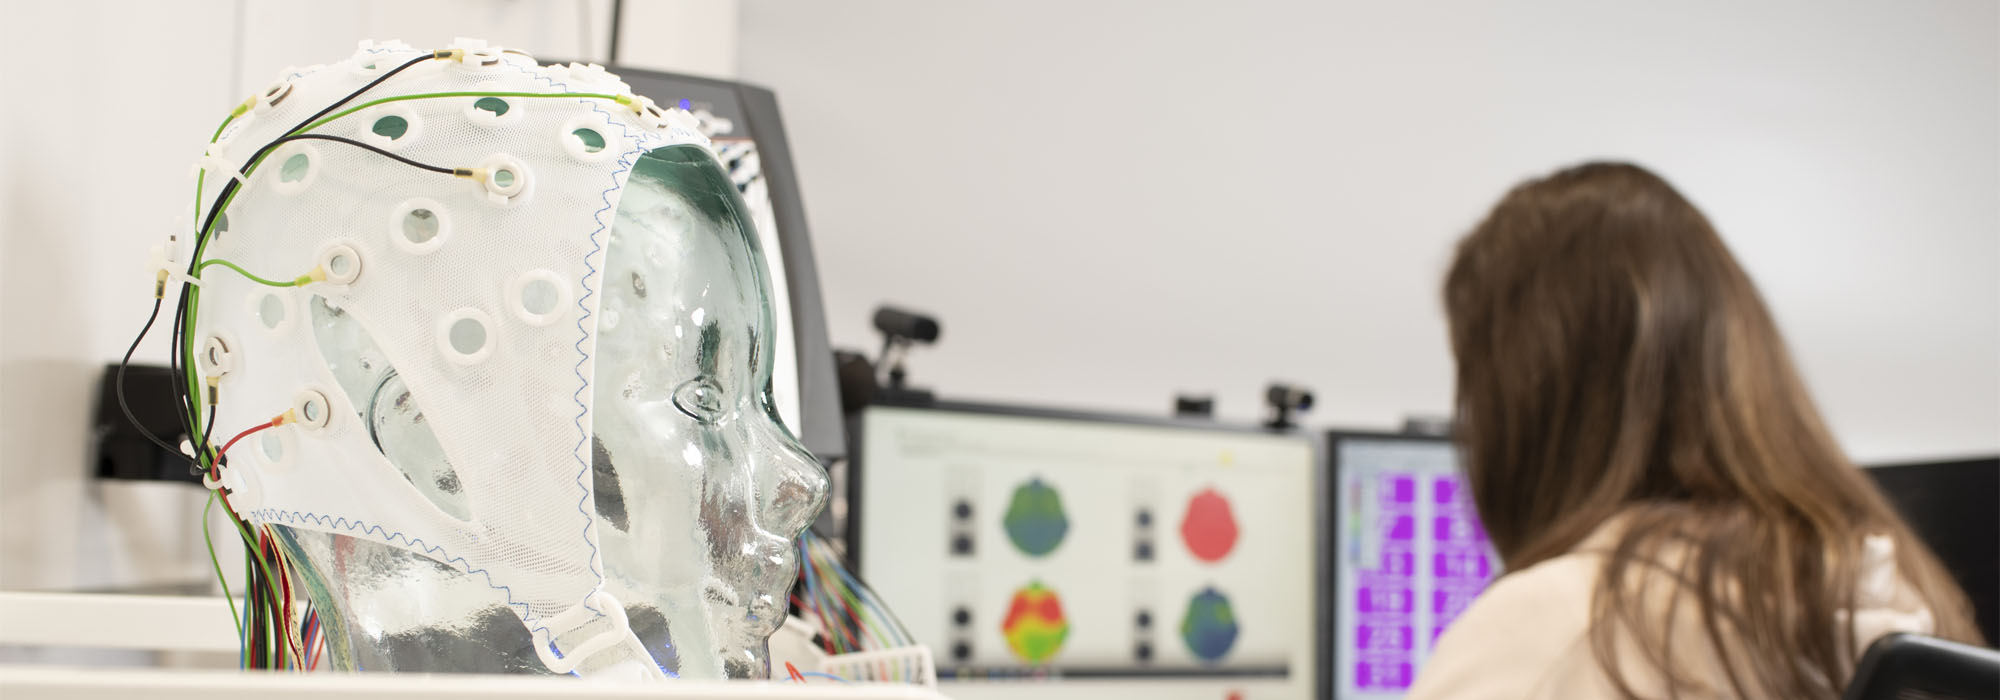 A female with brown hair is in the neuroscience lab analysing data and surrounded by electroencephalogram equipment